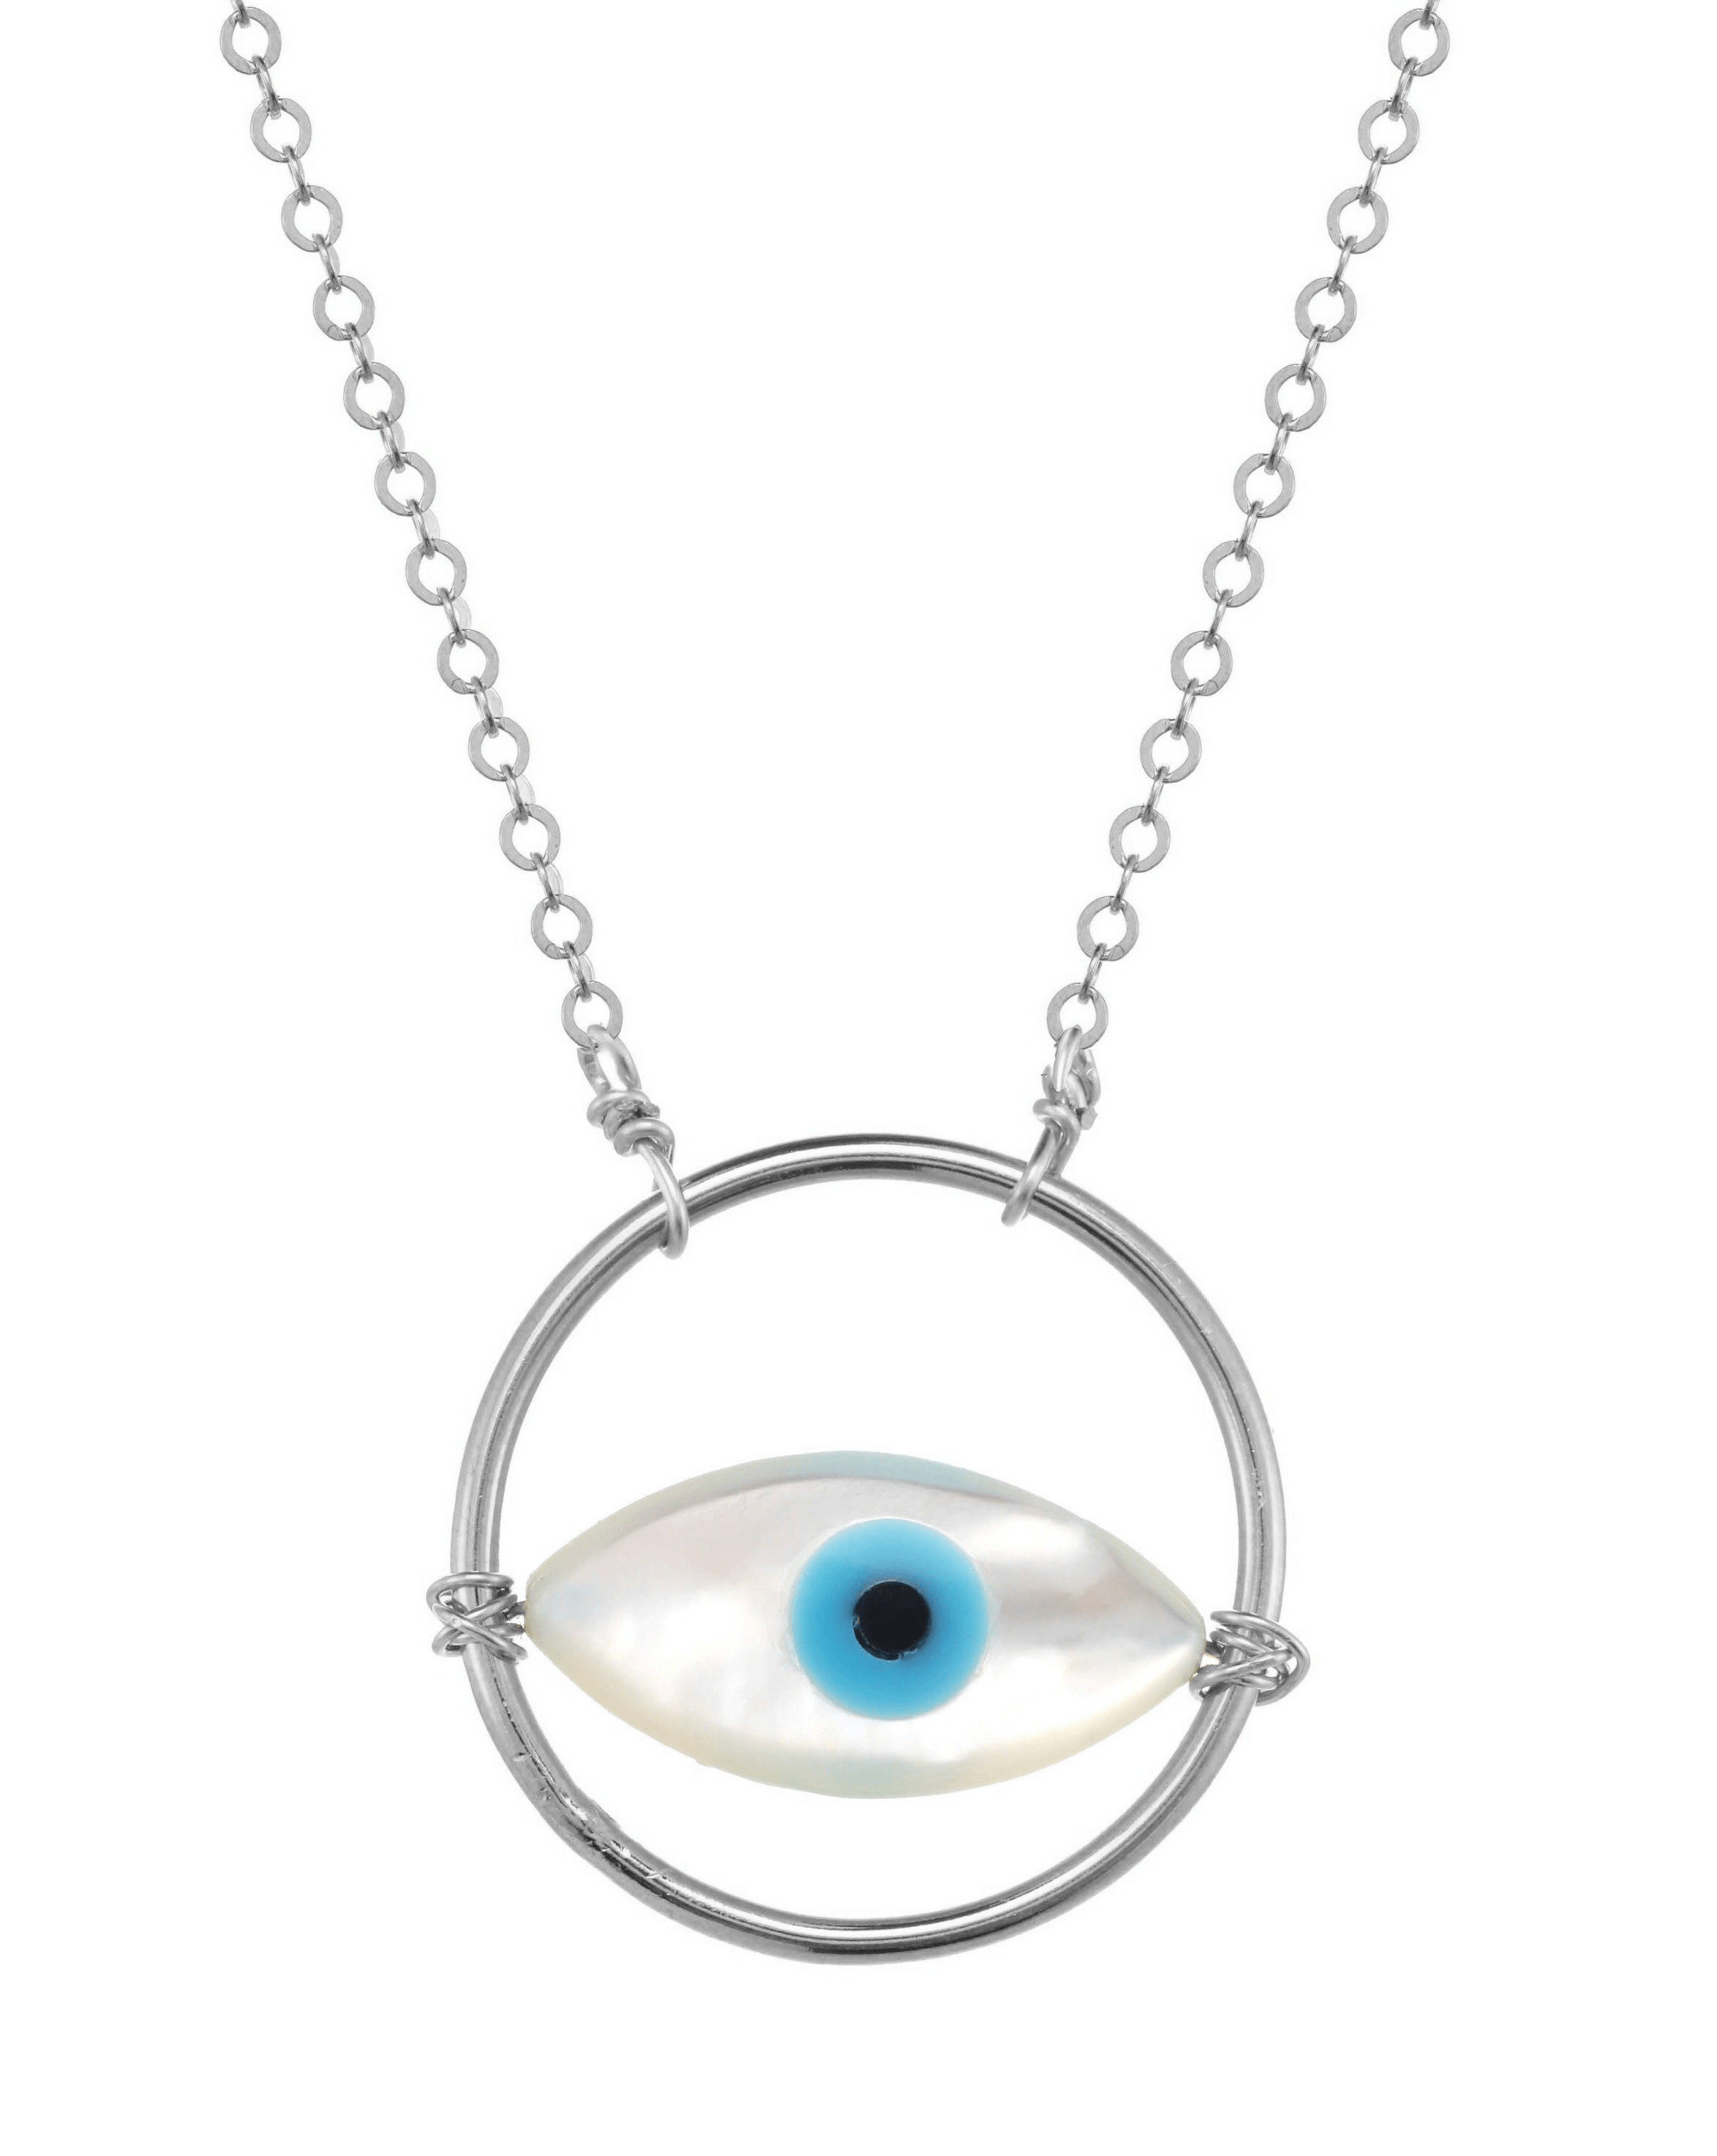 Ino Necklace by KOZAKH. A 16 to 18 inch adjustable length necklace in Sterling Silver, featuring a hand carved Mother of Pearl Evil Eye charm inside a ring.